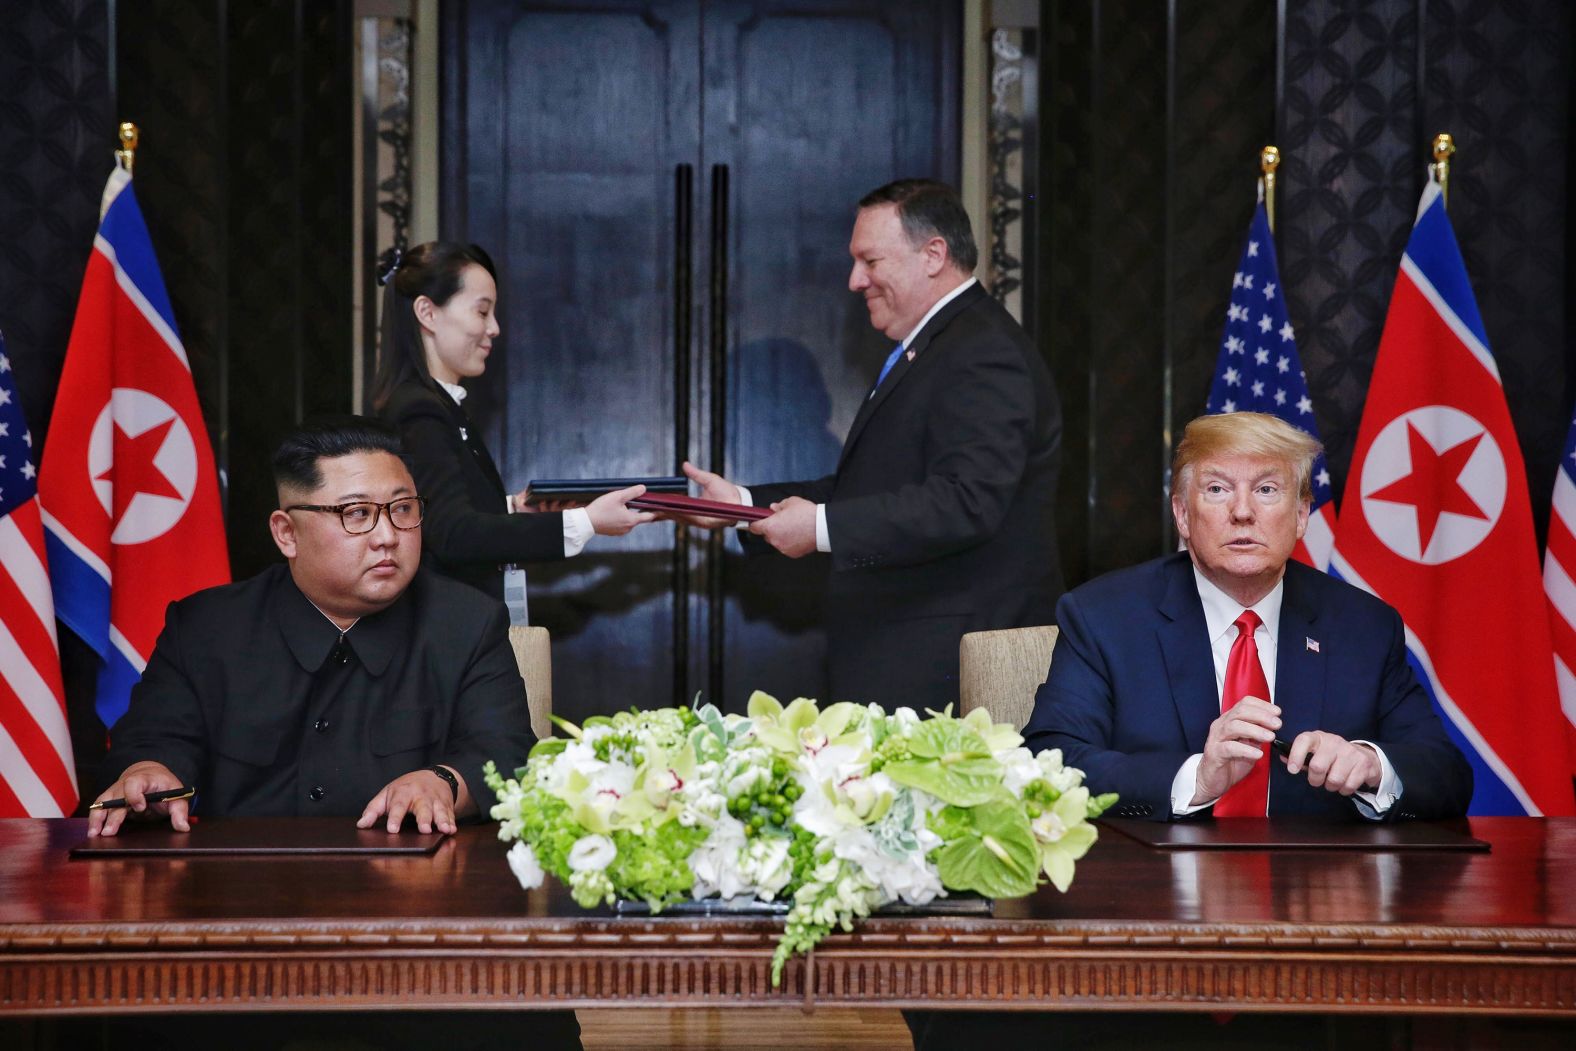 Trump sits with North Korean leader Kim Jong Un during <a href="index.php?page=&url=https%3A%2F%2Fwww.cnn.com%2Finteractive%2F2018%2F06%2Fpolitics%2Ftrump-kim-summit-cnnphotos%2Findex.html" target="_blank">their historic summit in Singapore</a> in June 2018. It was the first meeting ever between a sitting US president and a North Korean leader. At the end of the summit, they signed a document in which they agreed "to work toward complete denuclearization of the Korean Peninsula." In exchange, Trump agreed to "provide security guarantees" to North Korea.